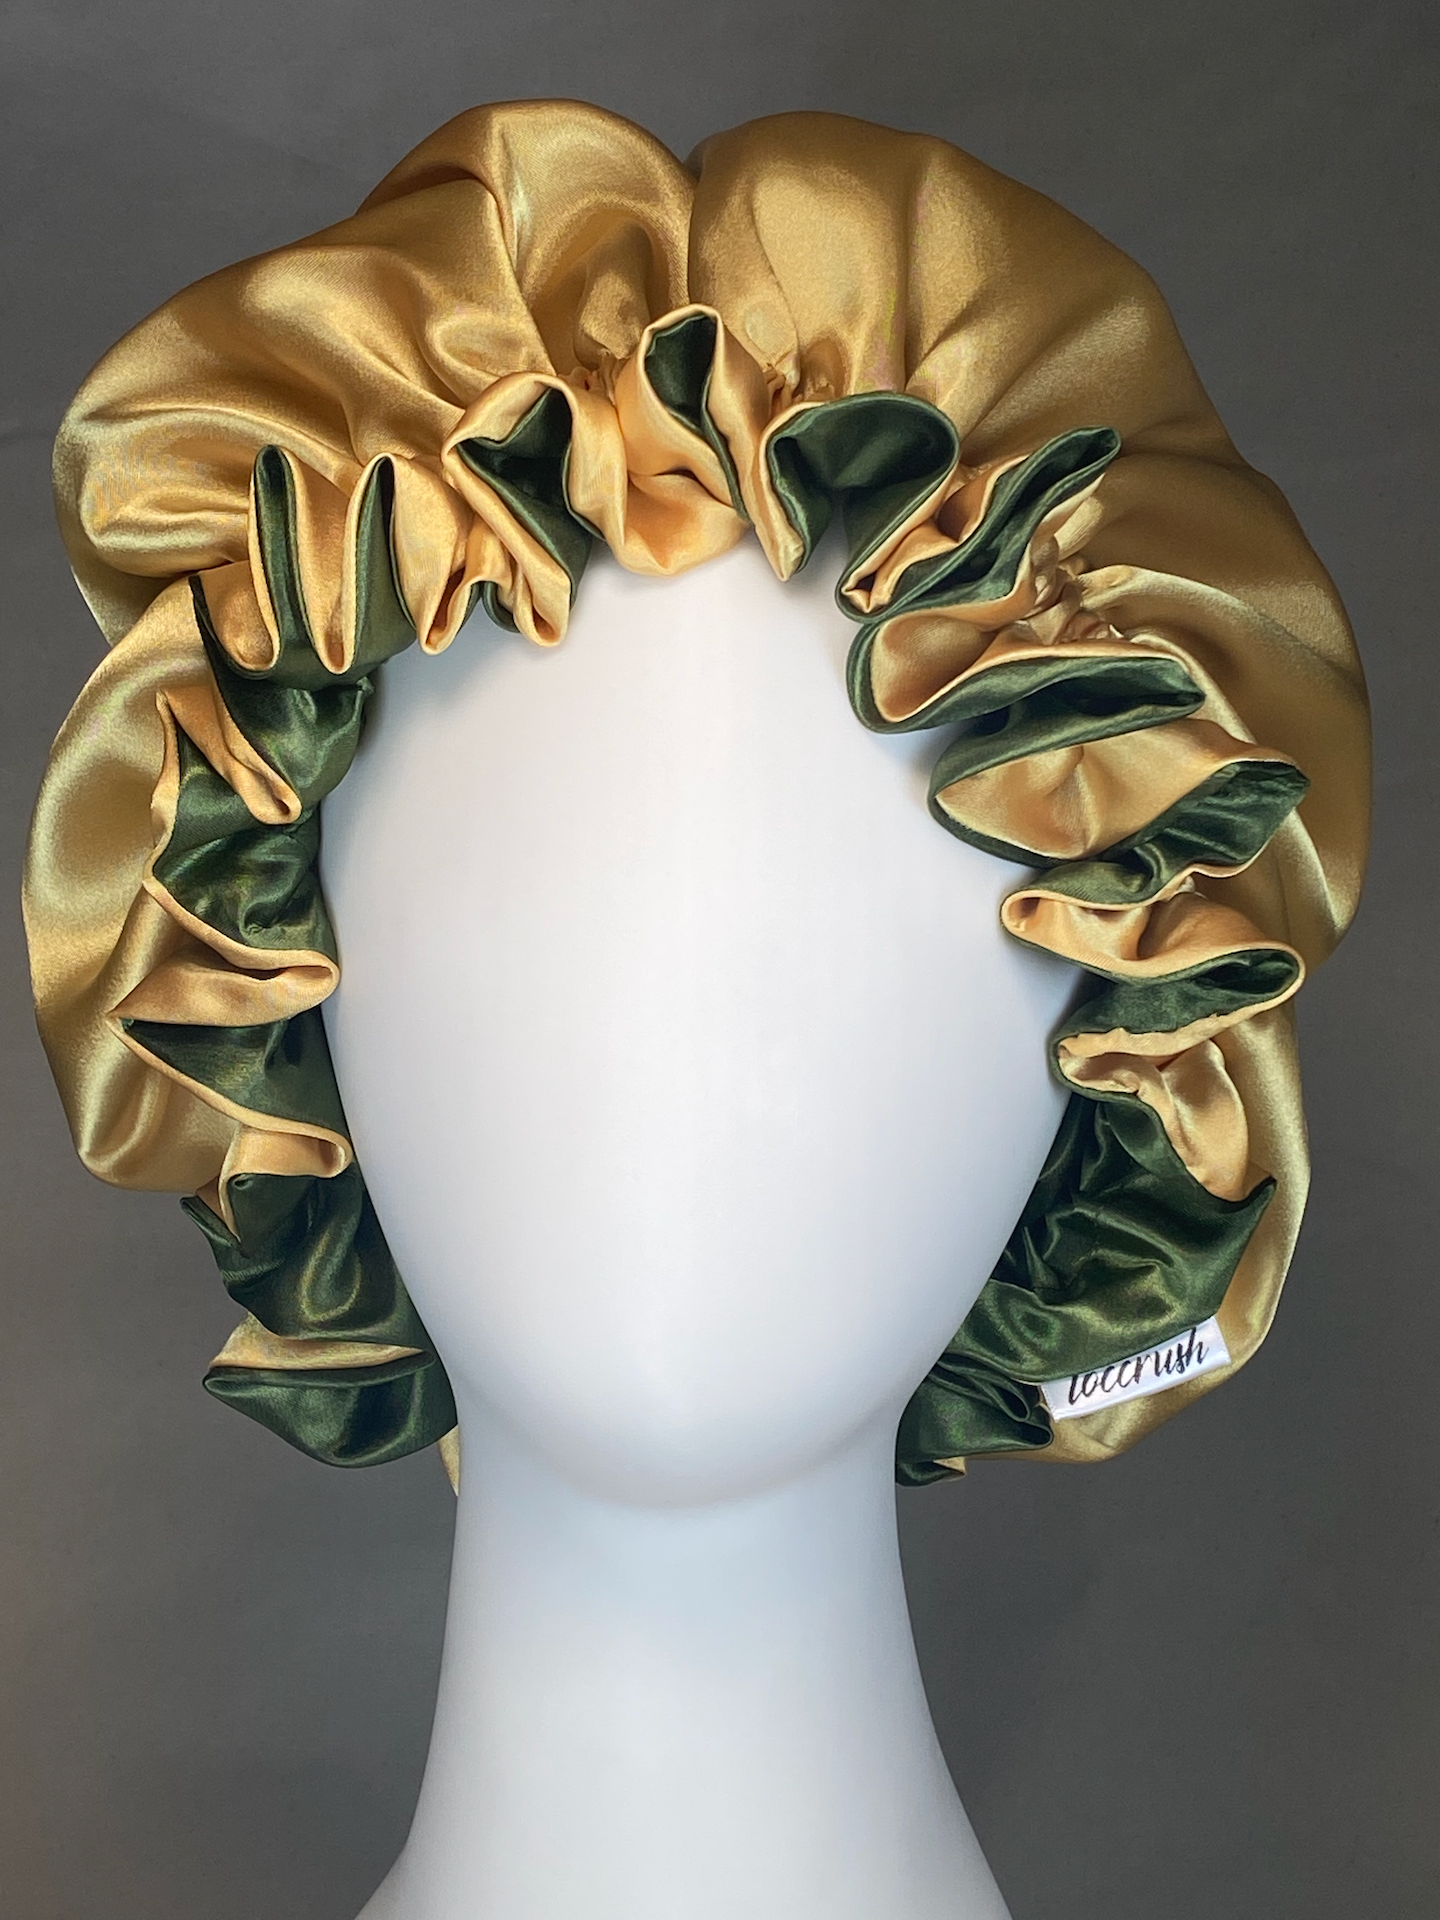 Satin Head Wrap, Reversible and made in Canada